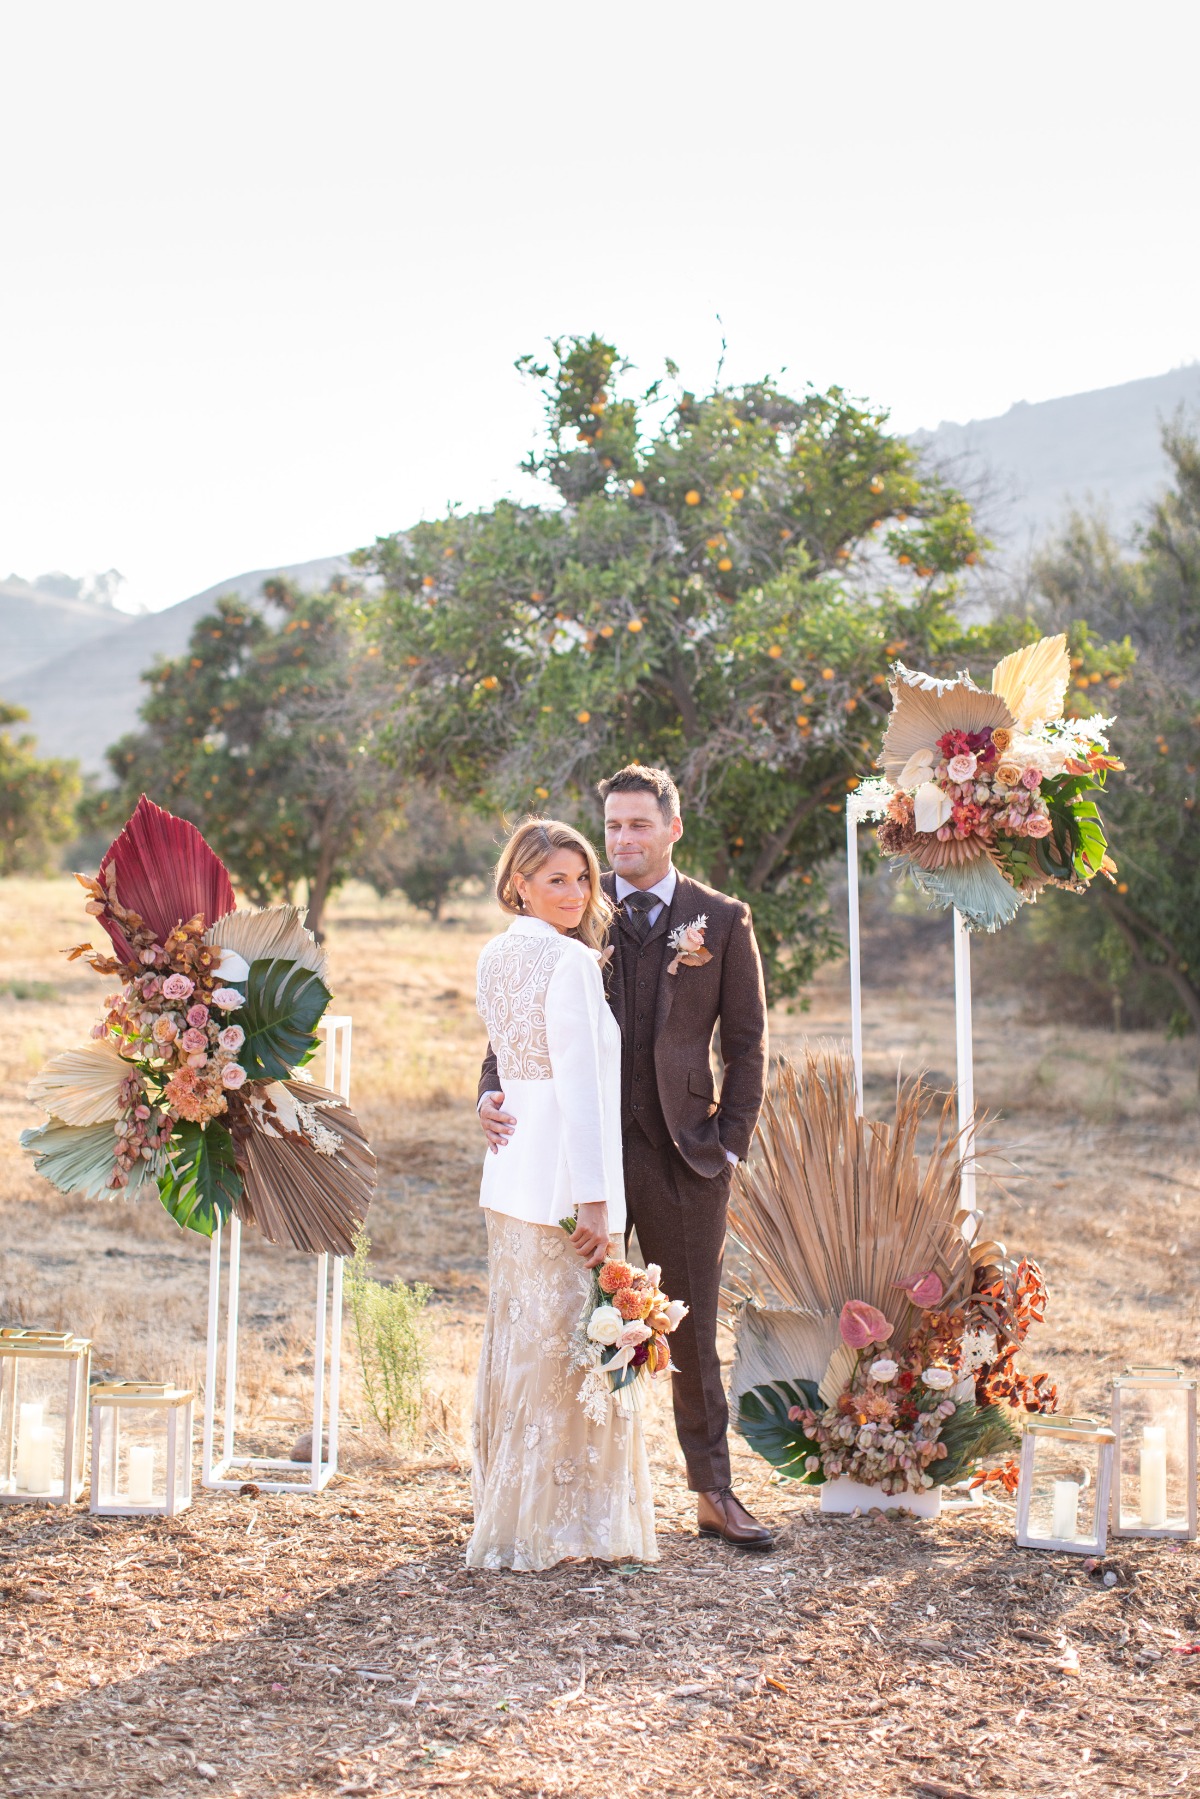 How To Have A Vintage Inspired Wedding At A Historic Landmark in SoCal